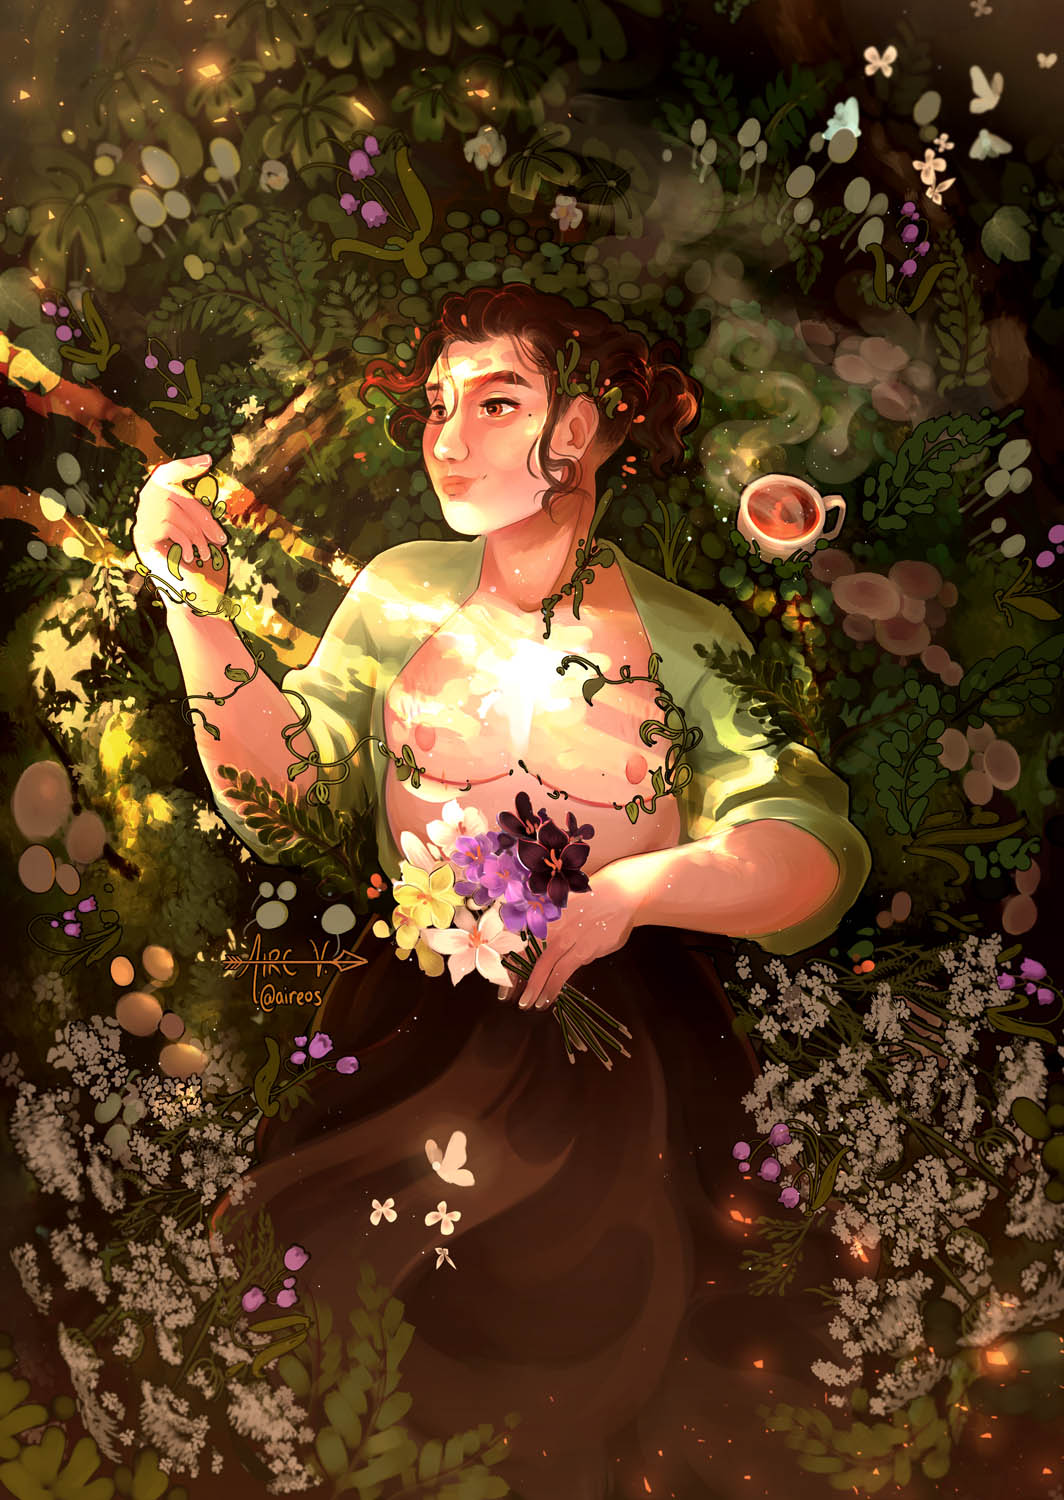 A digital painting of a person surrounded by flowers and vegetation with a cup of tea in the leaves above their shoulder. They are holding flowers in one hand and their shirt is open showing top surgery scars.